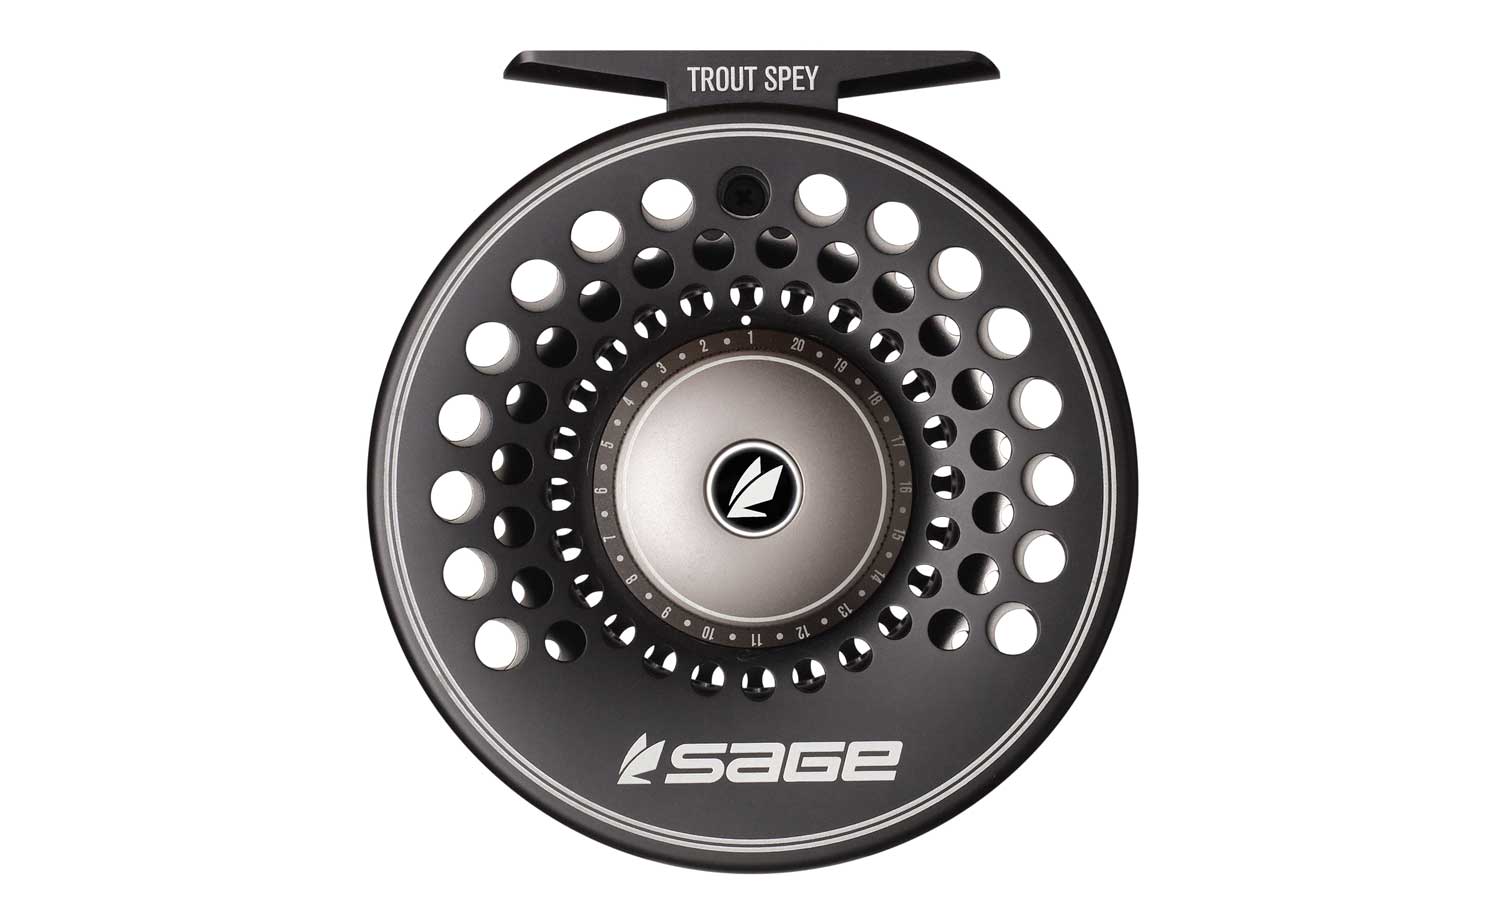 Fly Fishing Reel, Large Arbor Fly Reel Smooth Casting Fly Fishing Reel with  Left Right Hand Retrieve Conversion